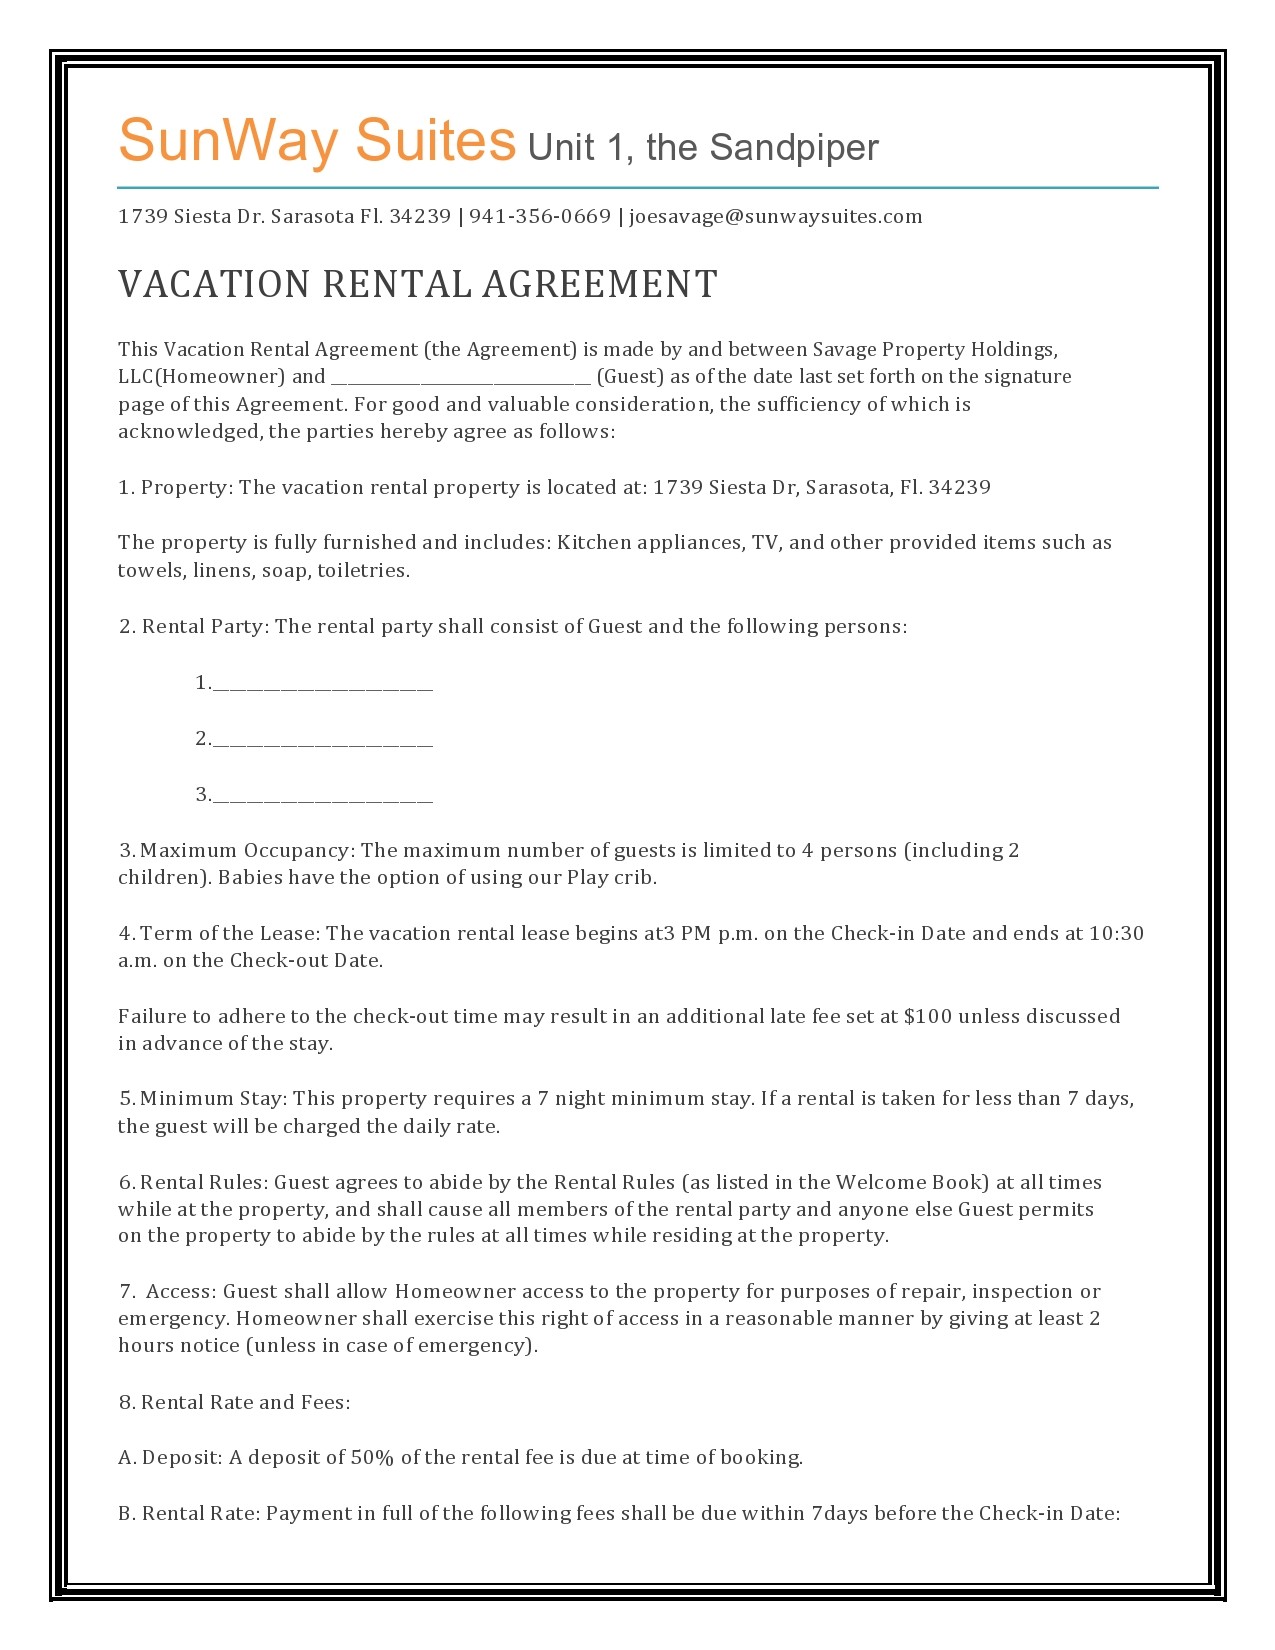 Free vacation rental agreement 30